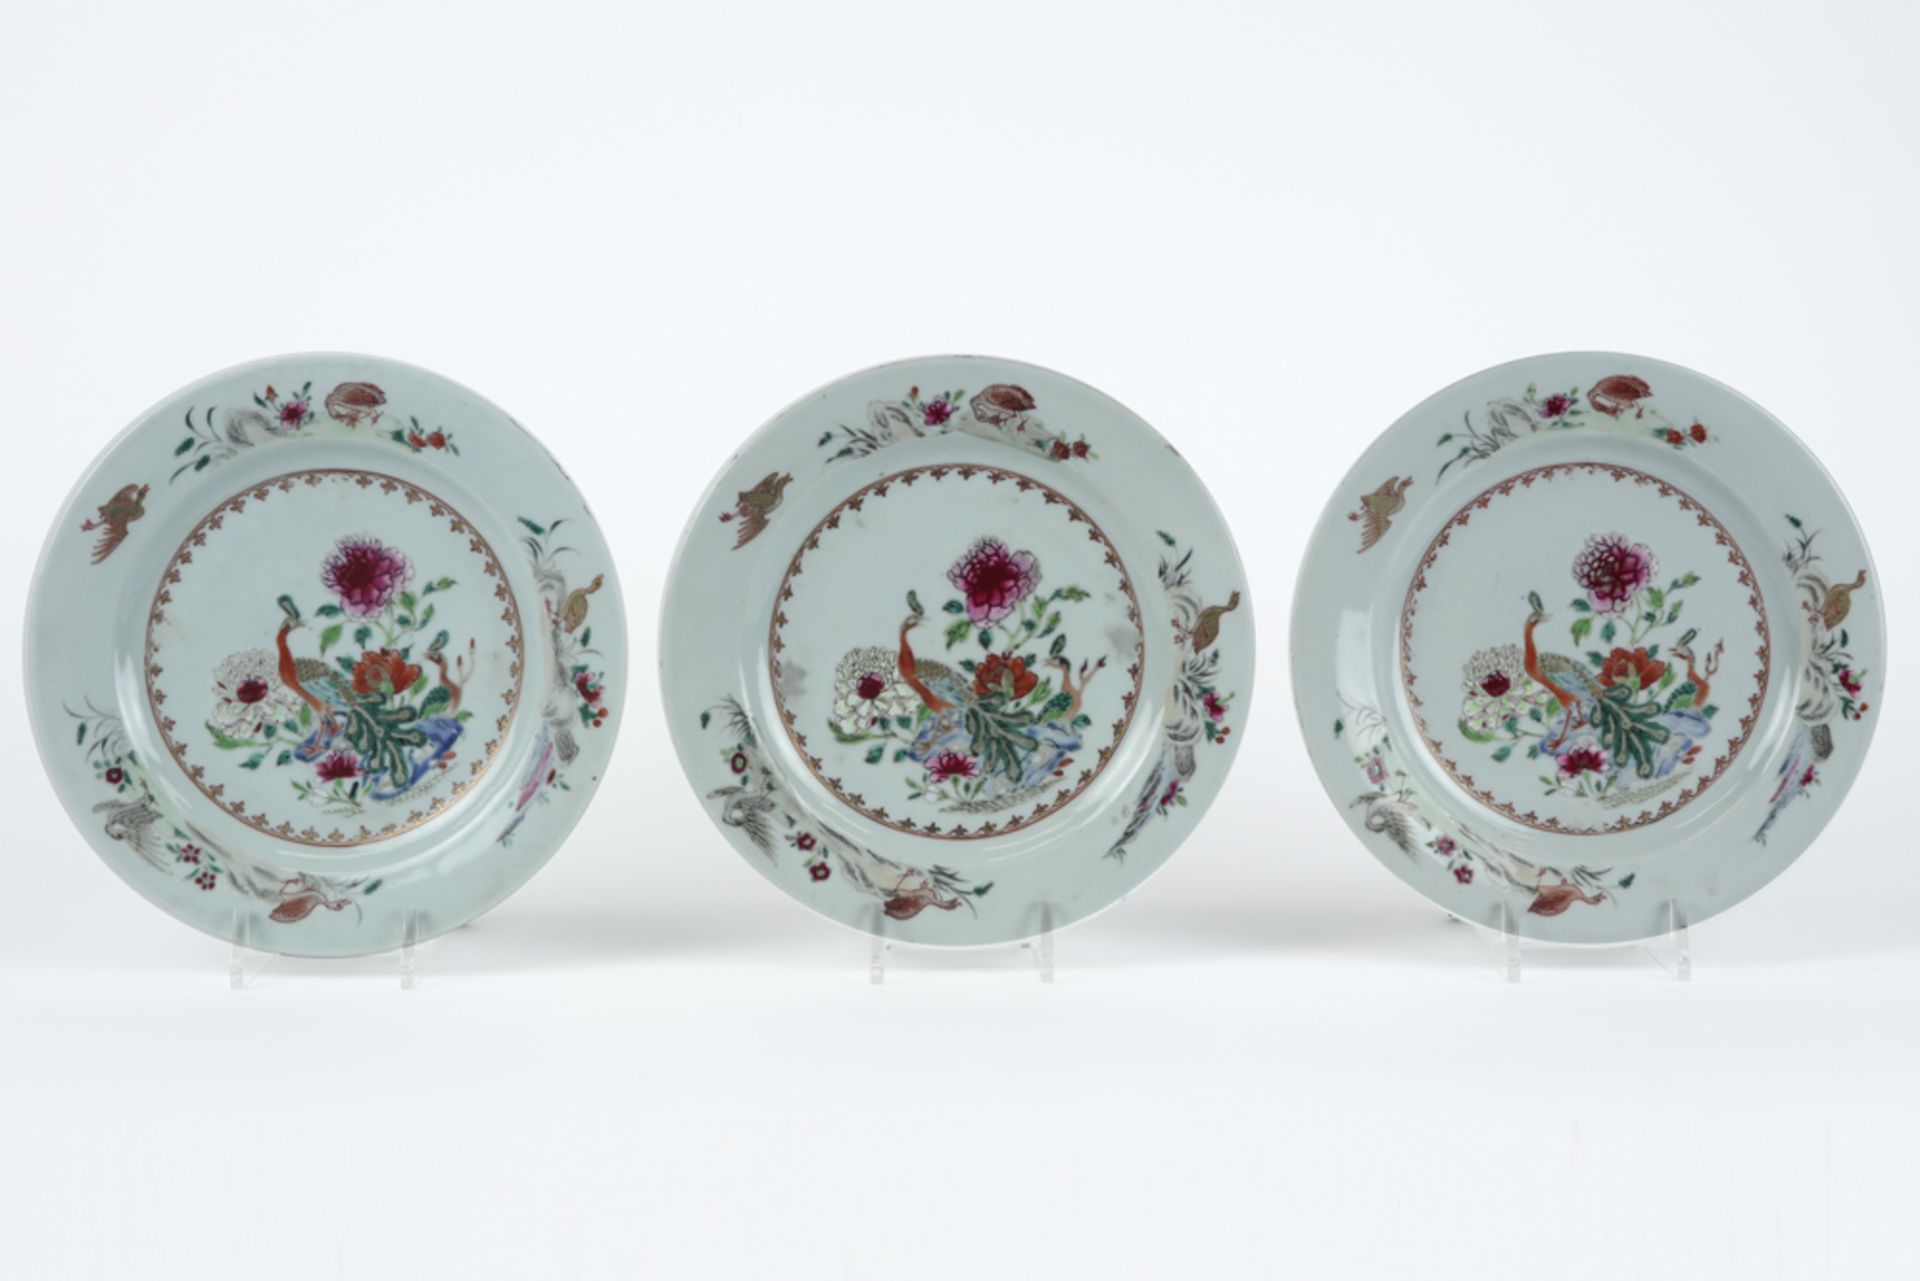 series of six 18th Cent. Chinese plate in porcelain with a 'Famille Rose' decor with flowers and - Image 2 of 5